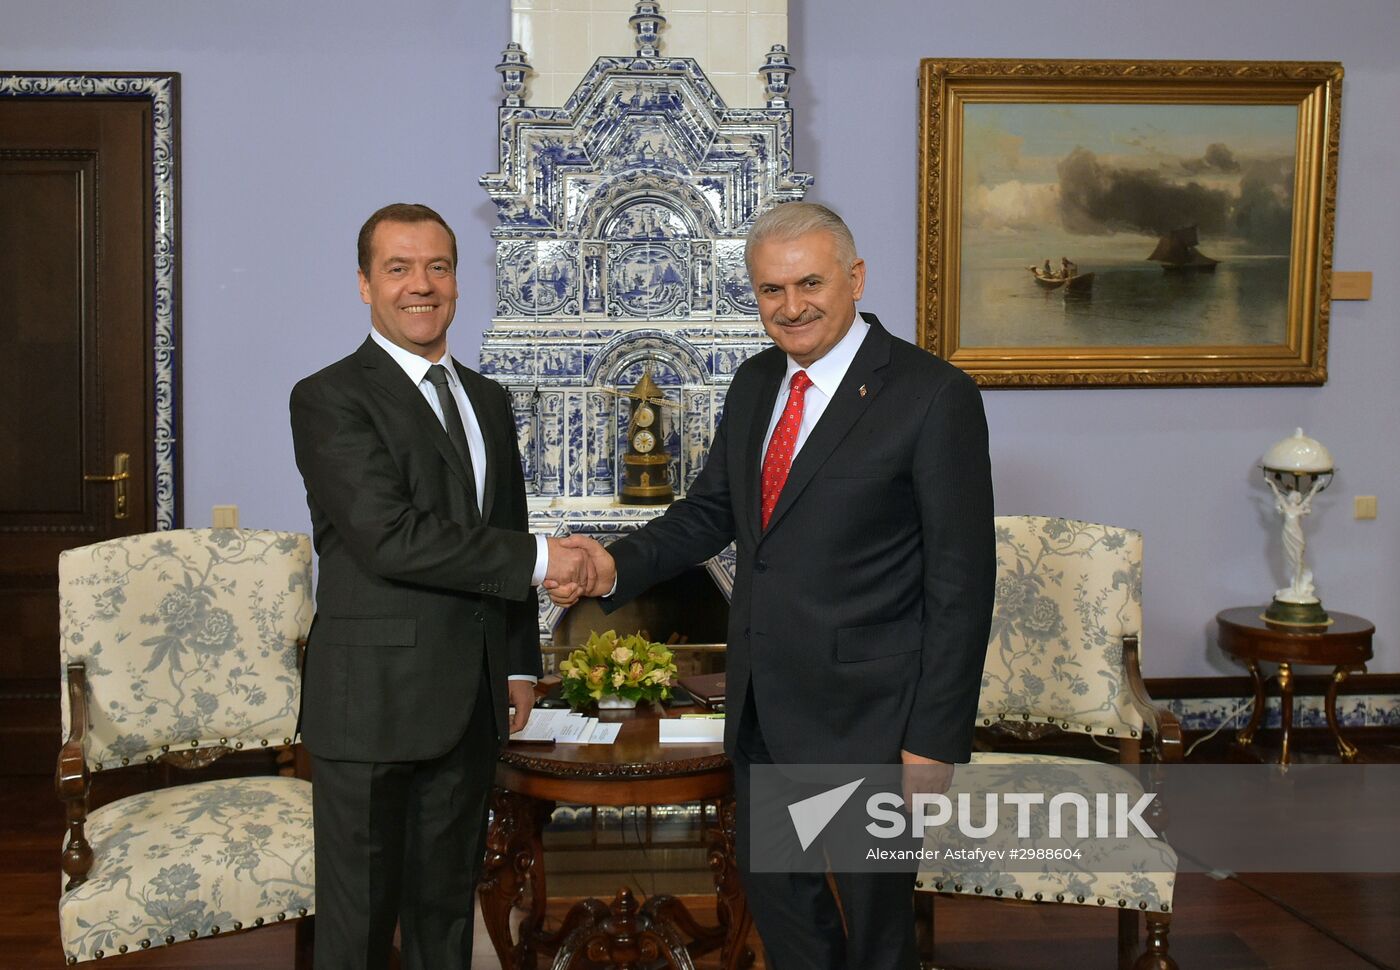 Prime Minister Medvedev meets with Turkish PM Yildirim